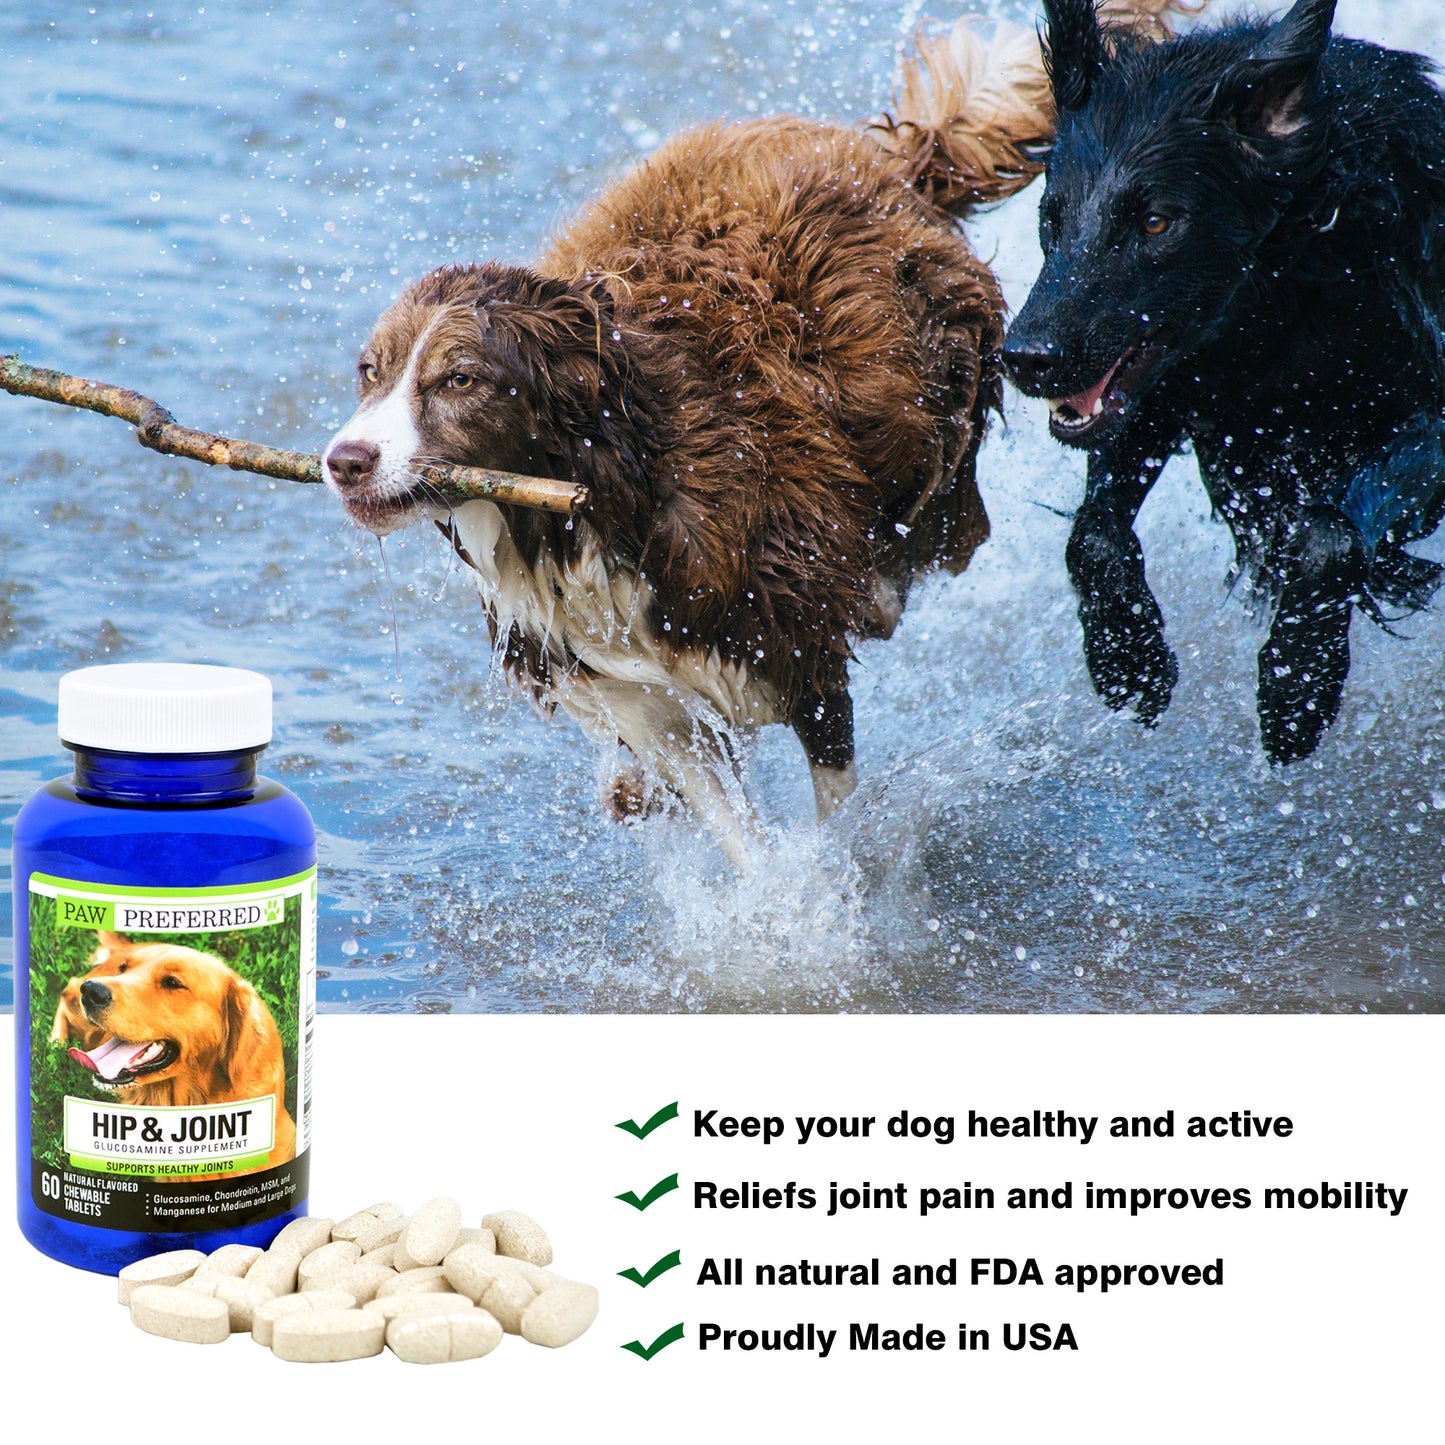 Premium Canine Glucosamine Chondroitin with MSM for Dogs, Great All Natural Beef Liver Chews Supplement for Hip and Joints, Safe and Made in USA